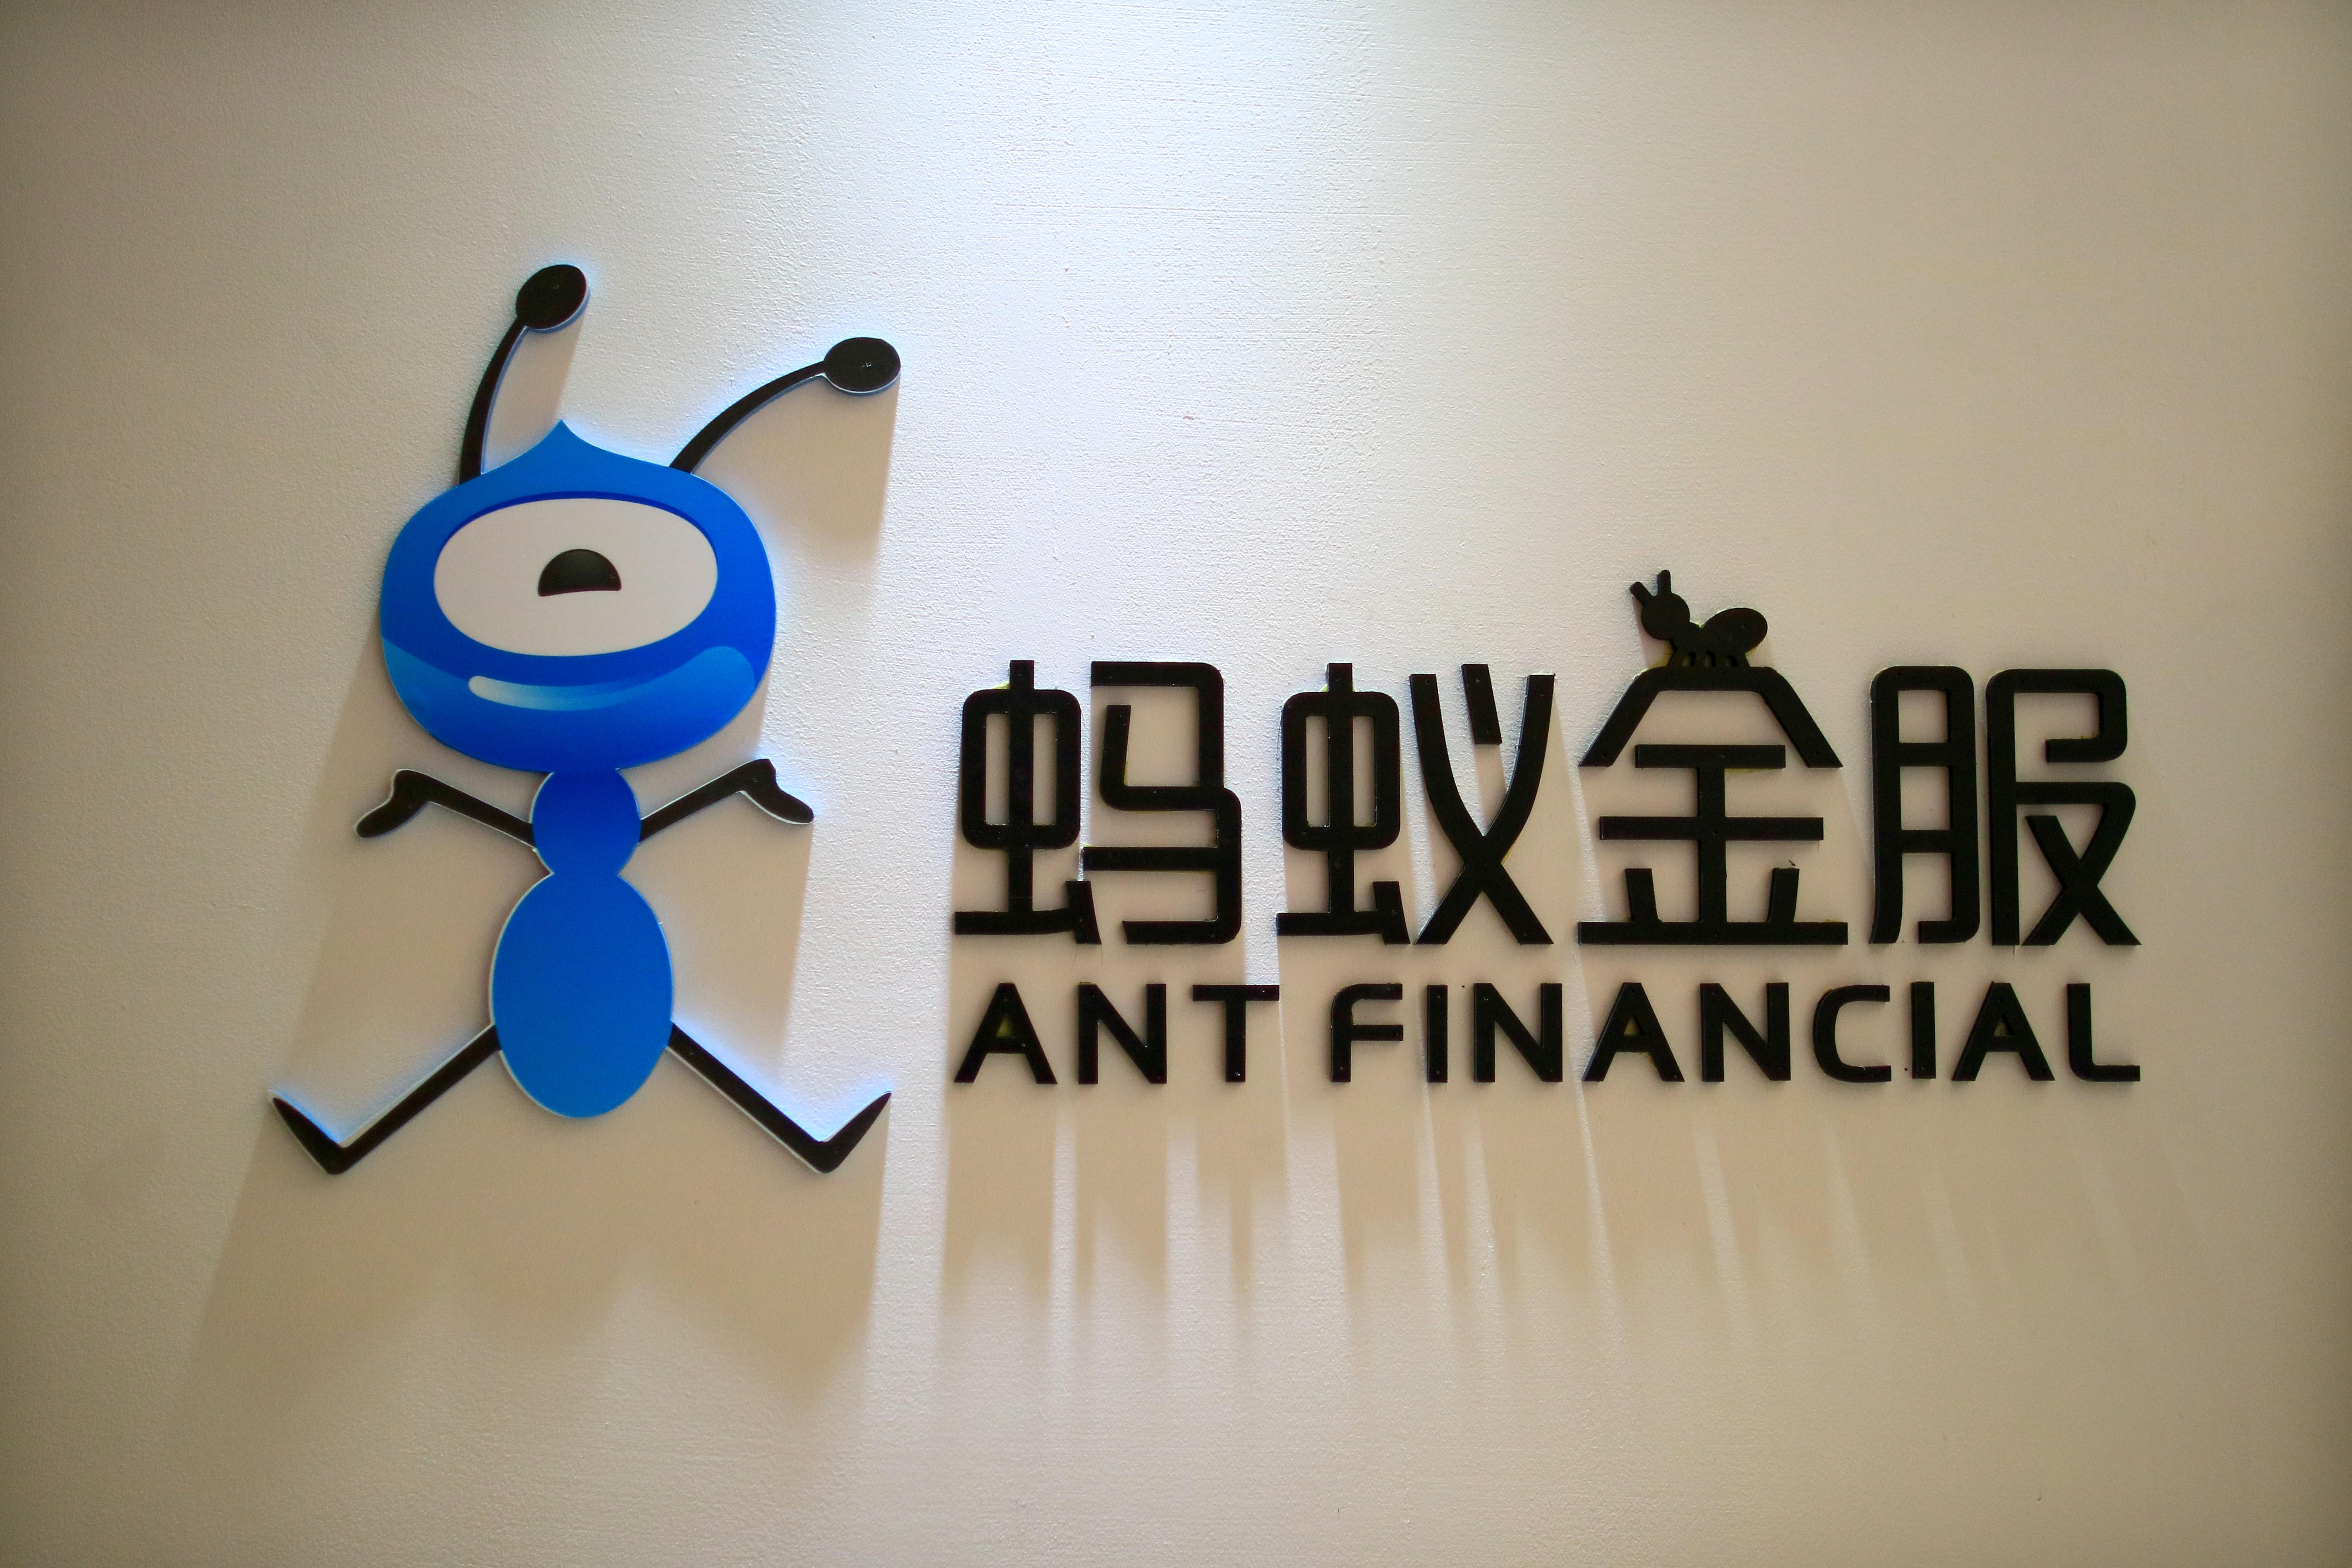 ant financial 4